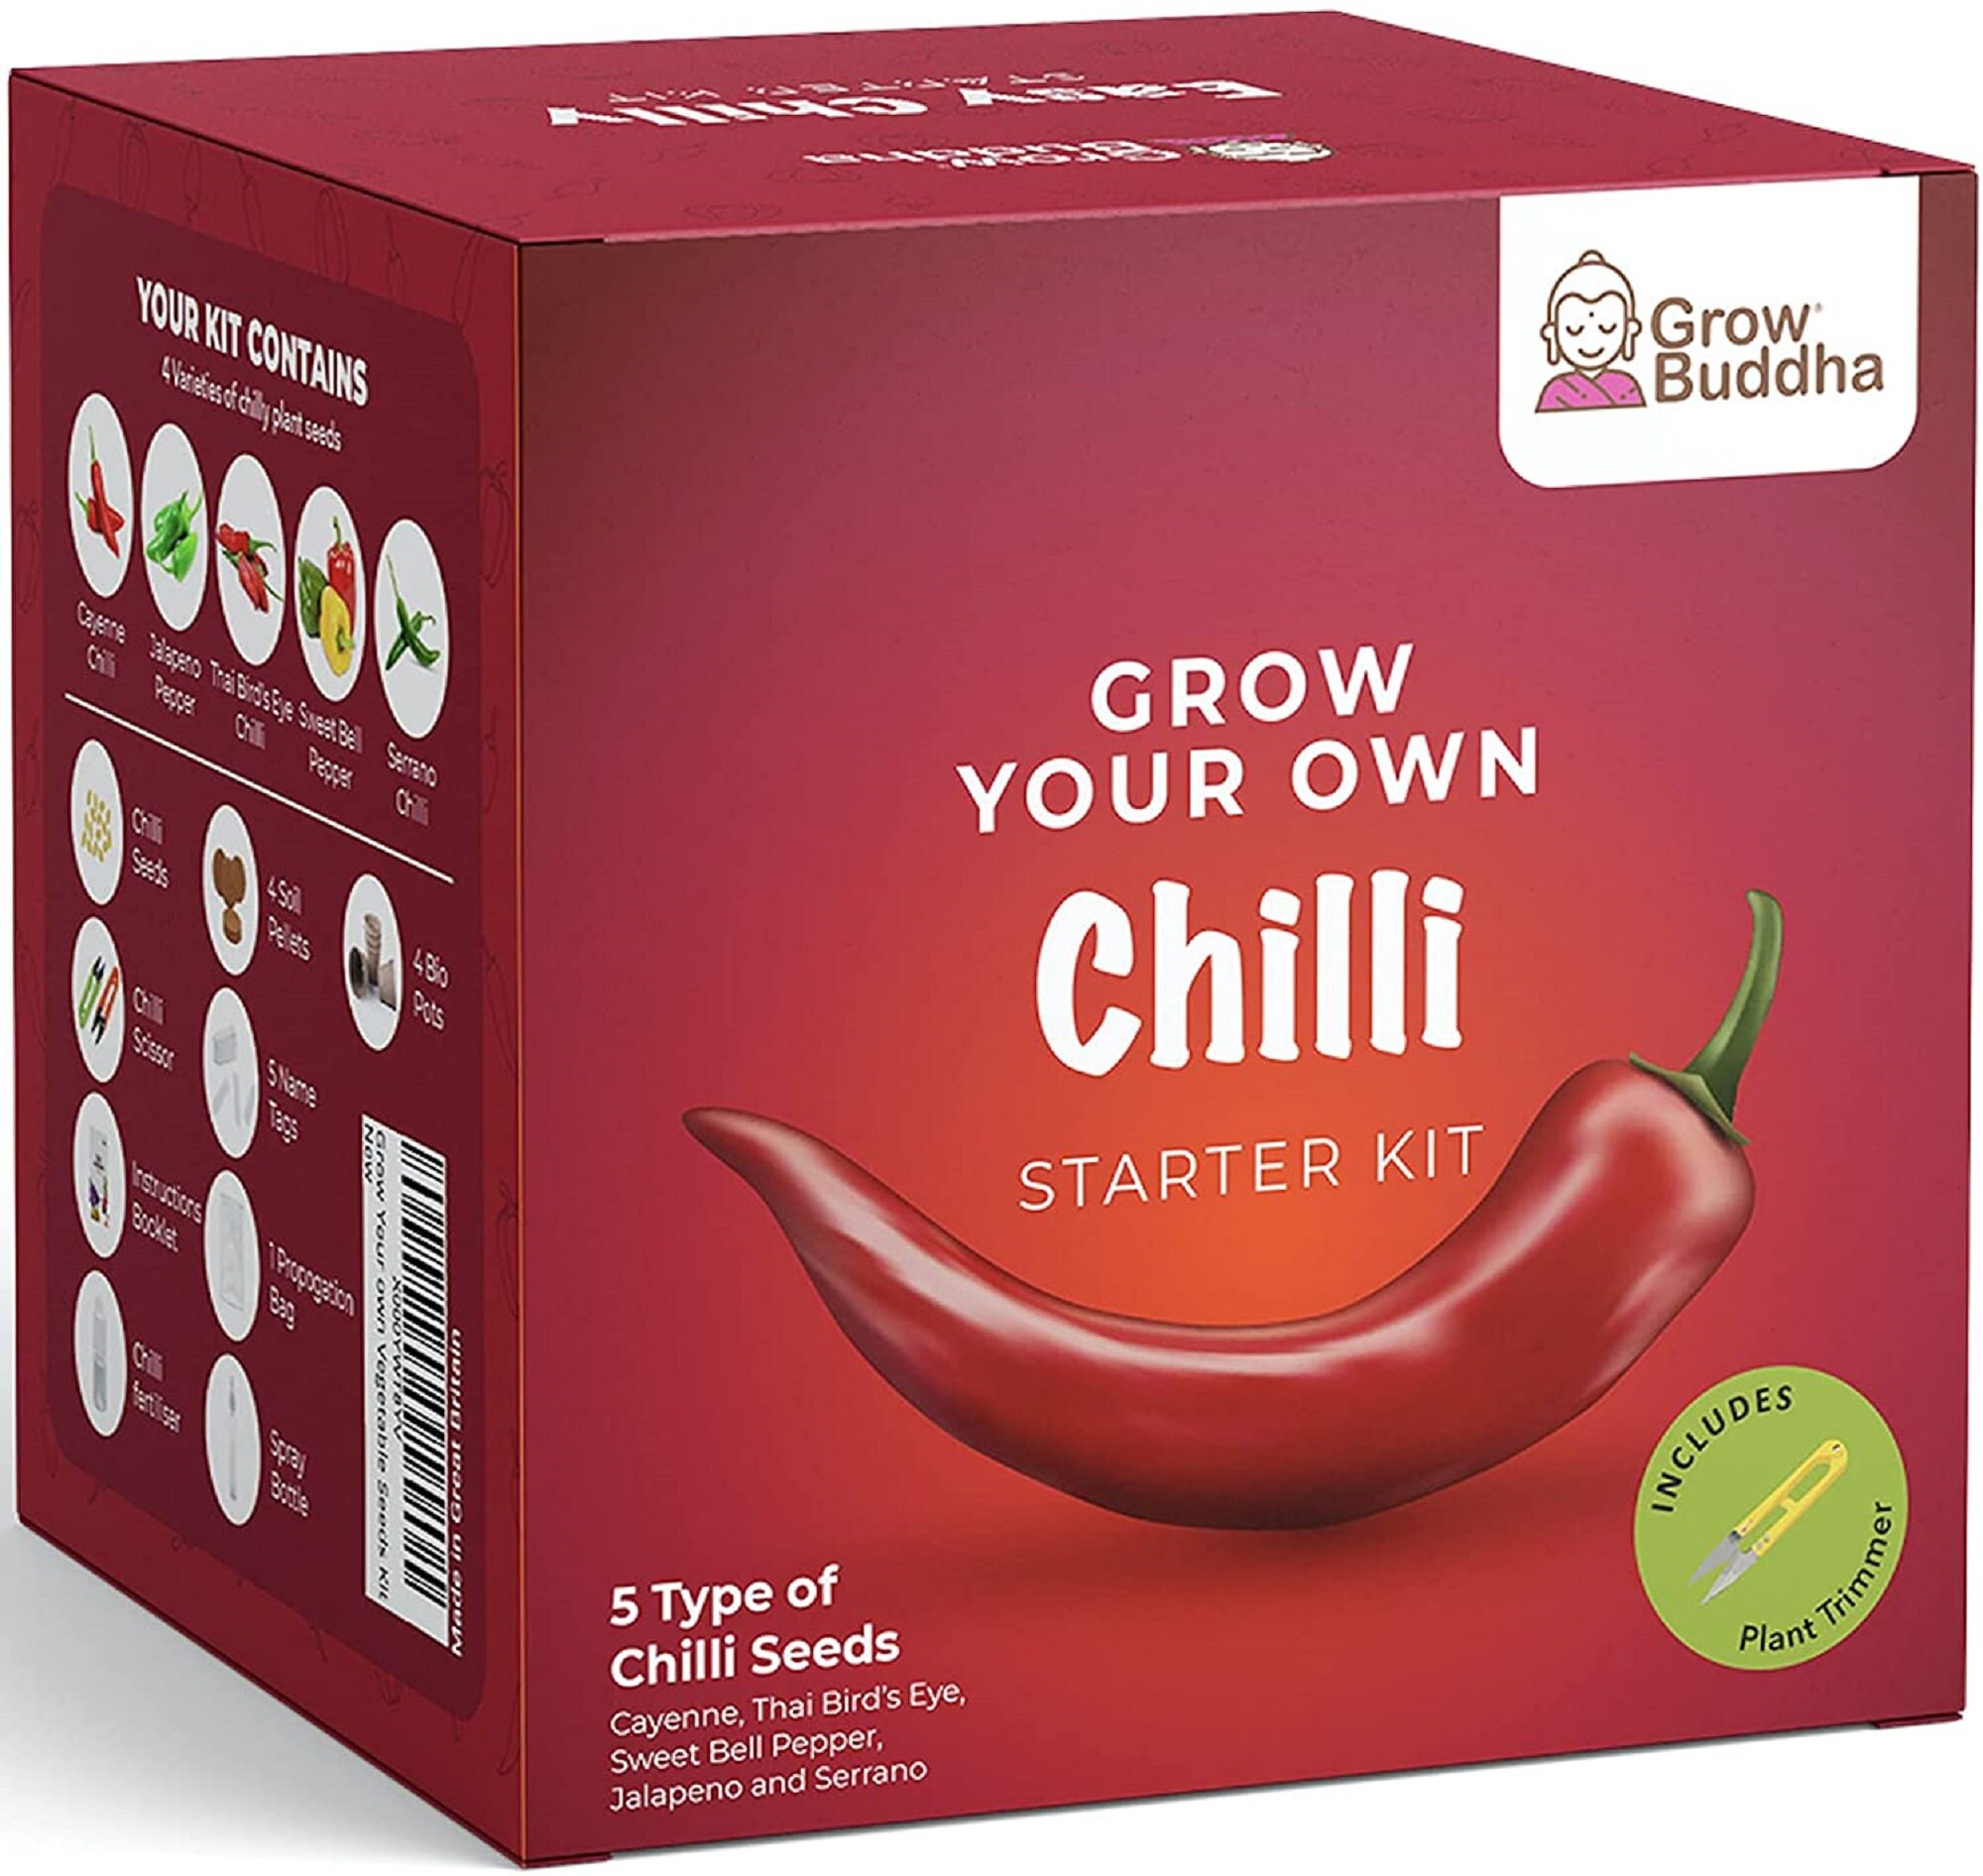 Chili Pepper Grow Your Own jalapeno Chilli Kit 